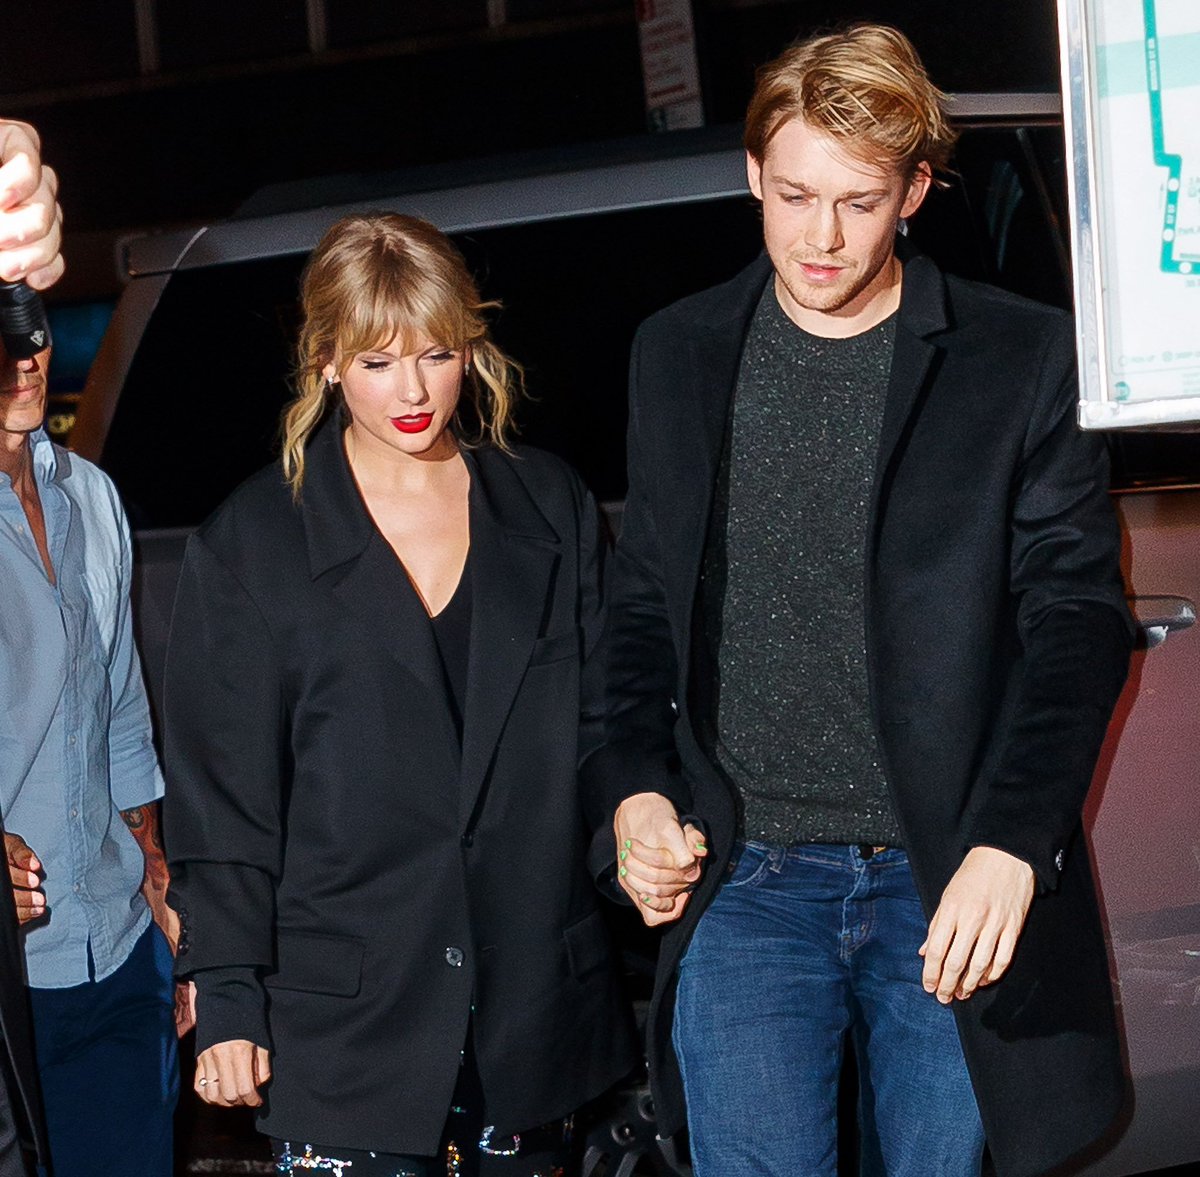 Taylor Swift and Joe Alwyn have ended their 6 years relationship, Entertainment Tonight confirms.